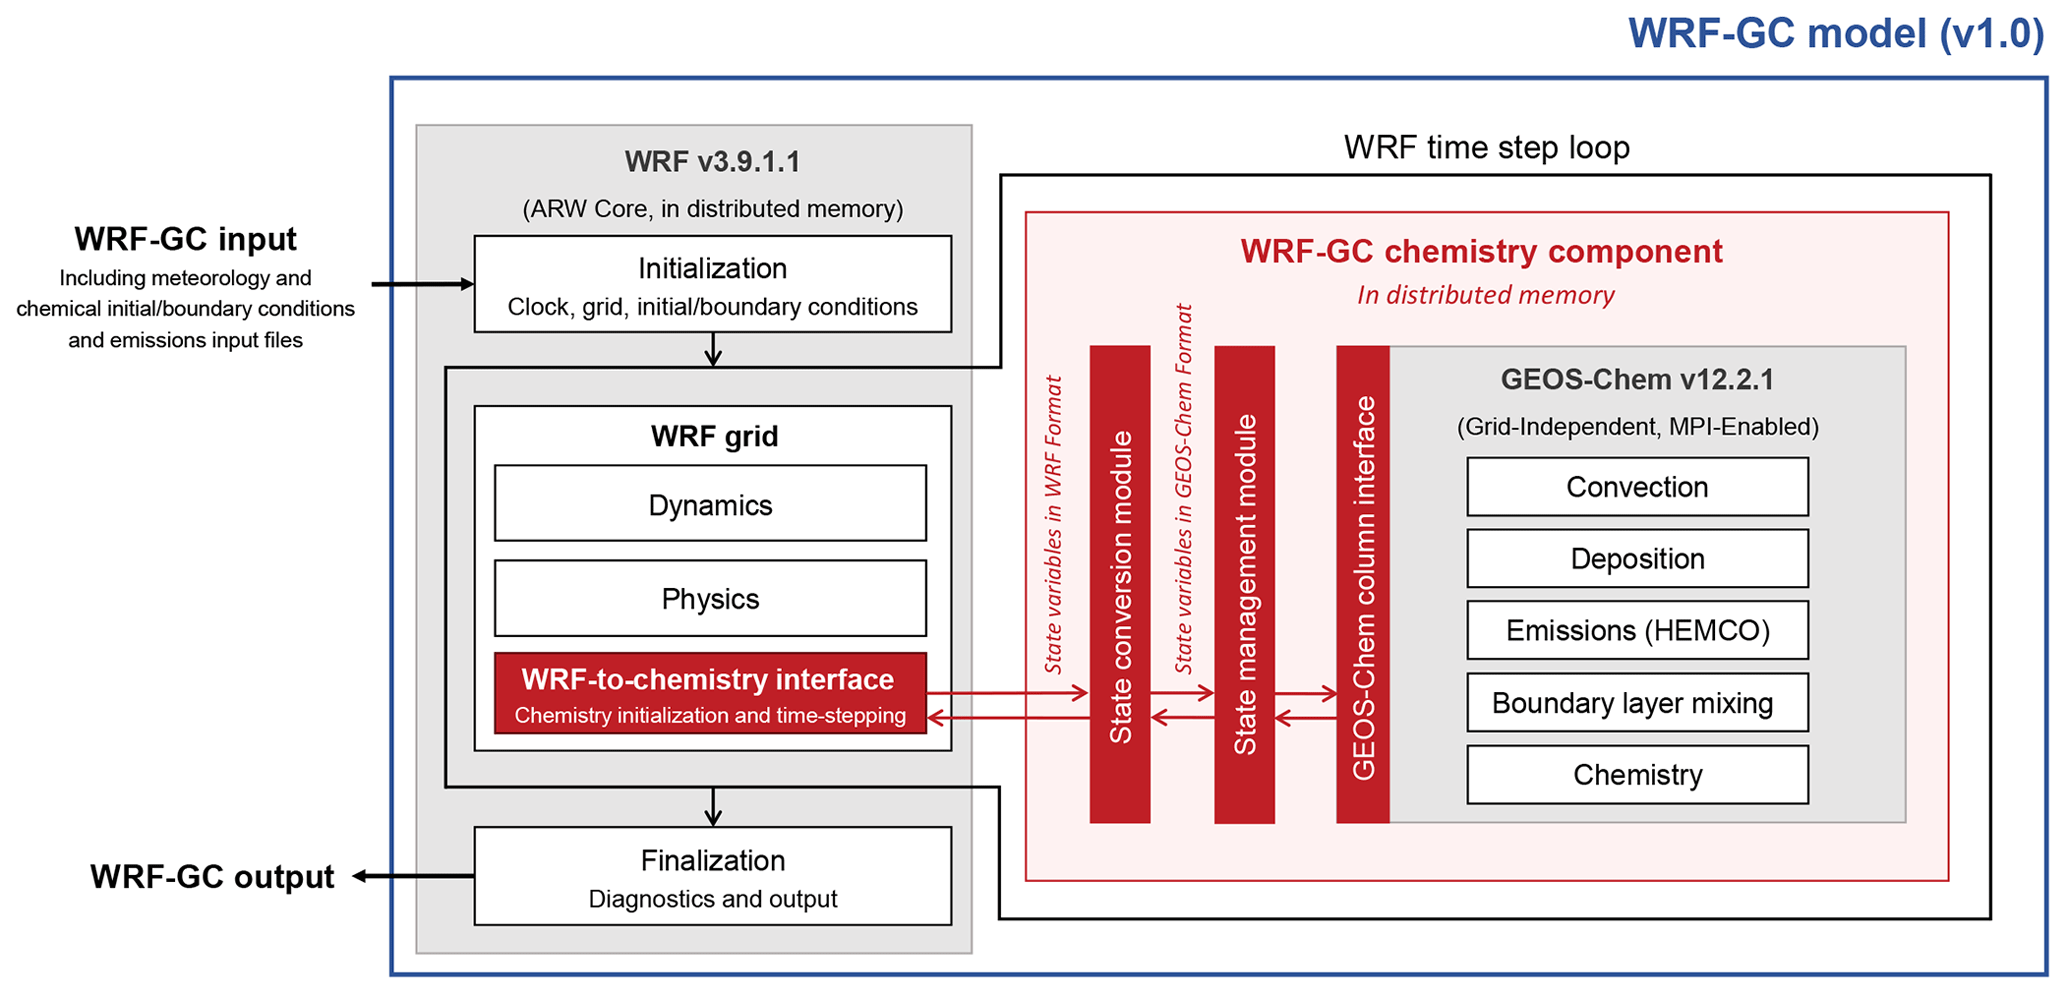 WRF-GC v1.0 structure